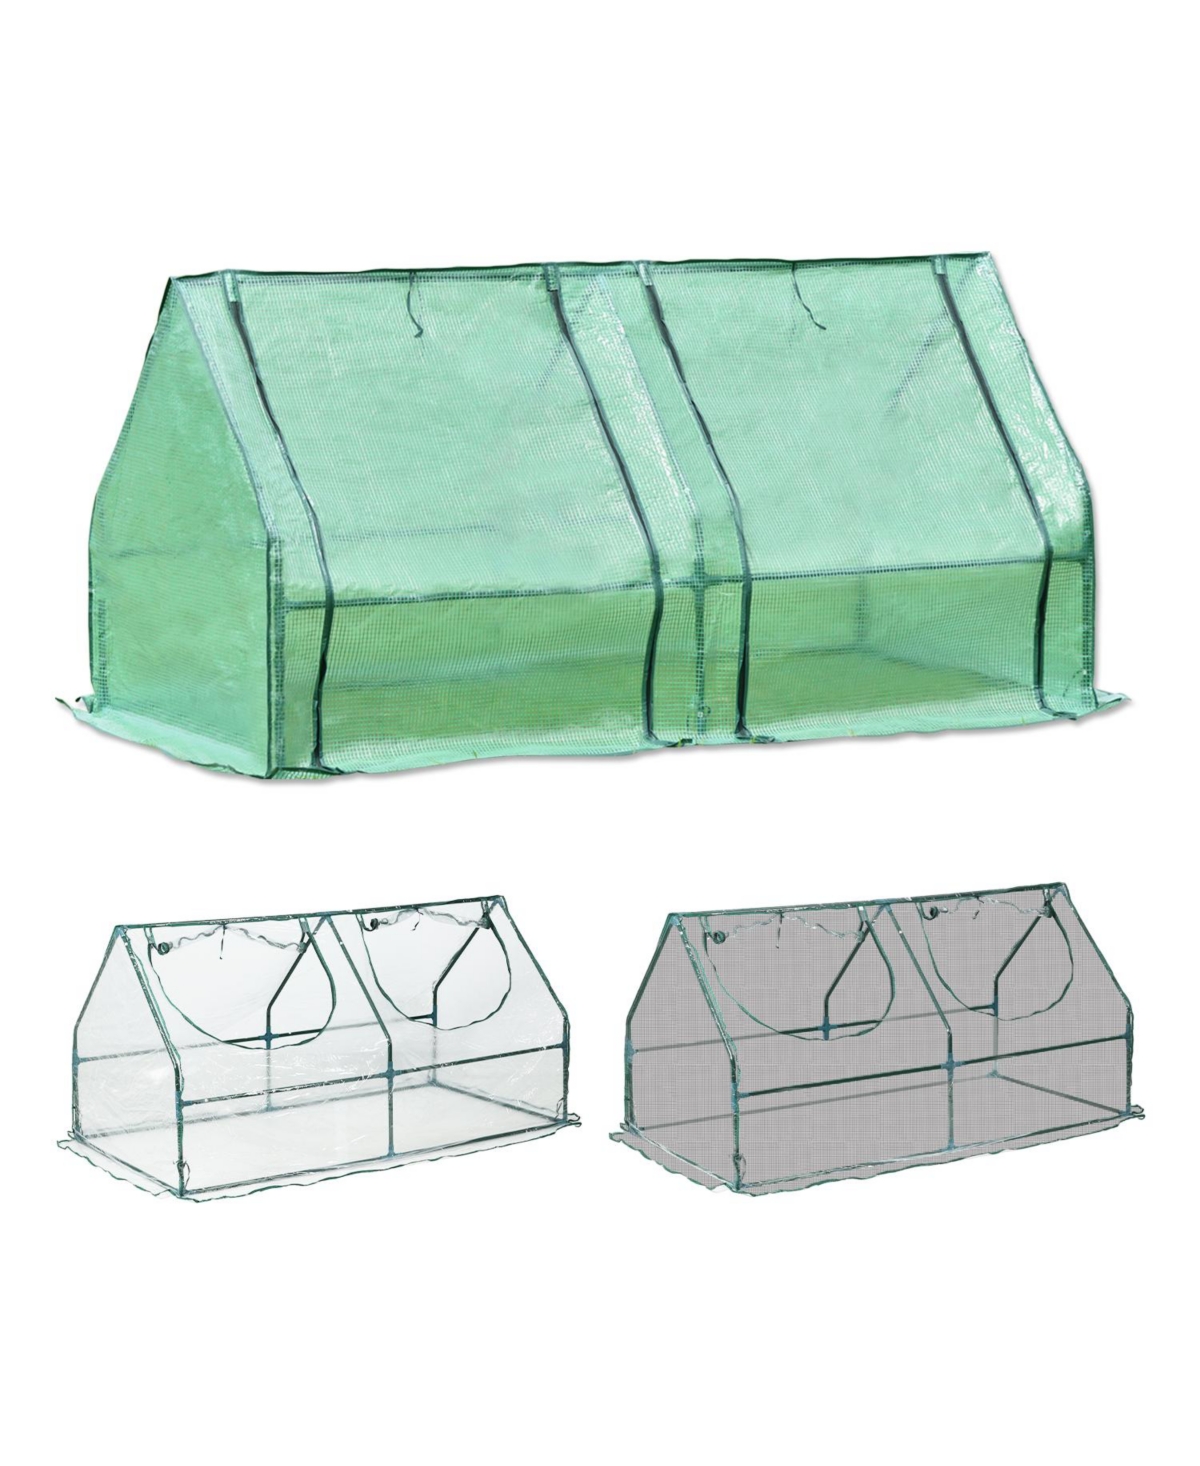 Outdoor 6' x 3 ' x 3' Portable House-Shaped Mini Greenhouse with Pe Cover Green - Green, transparent, black